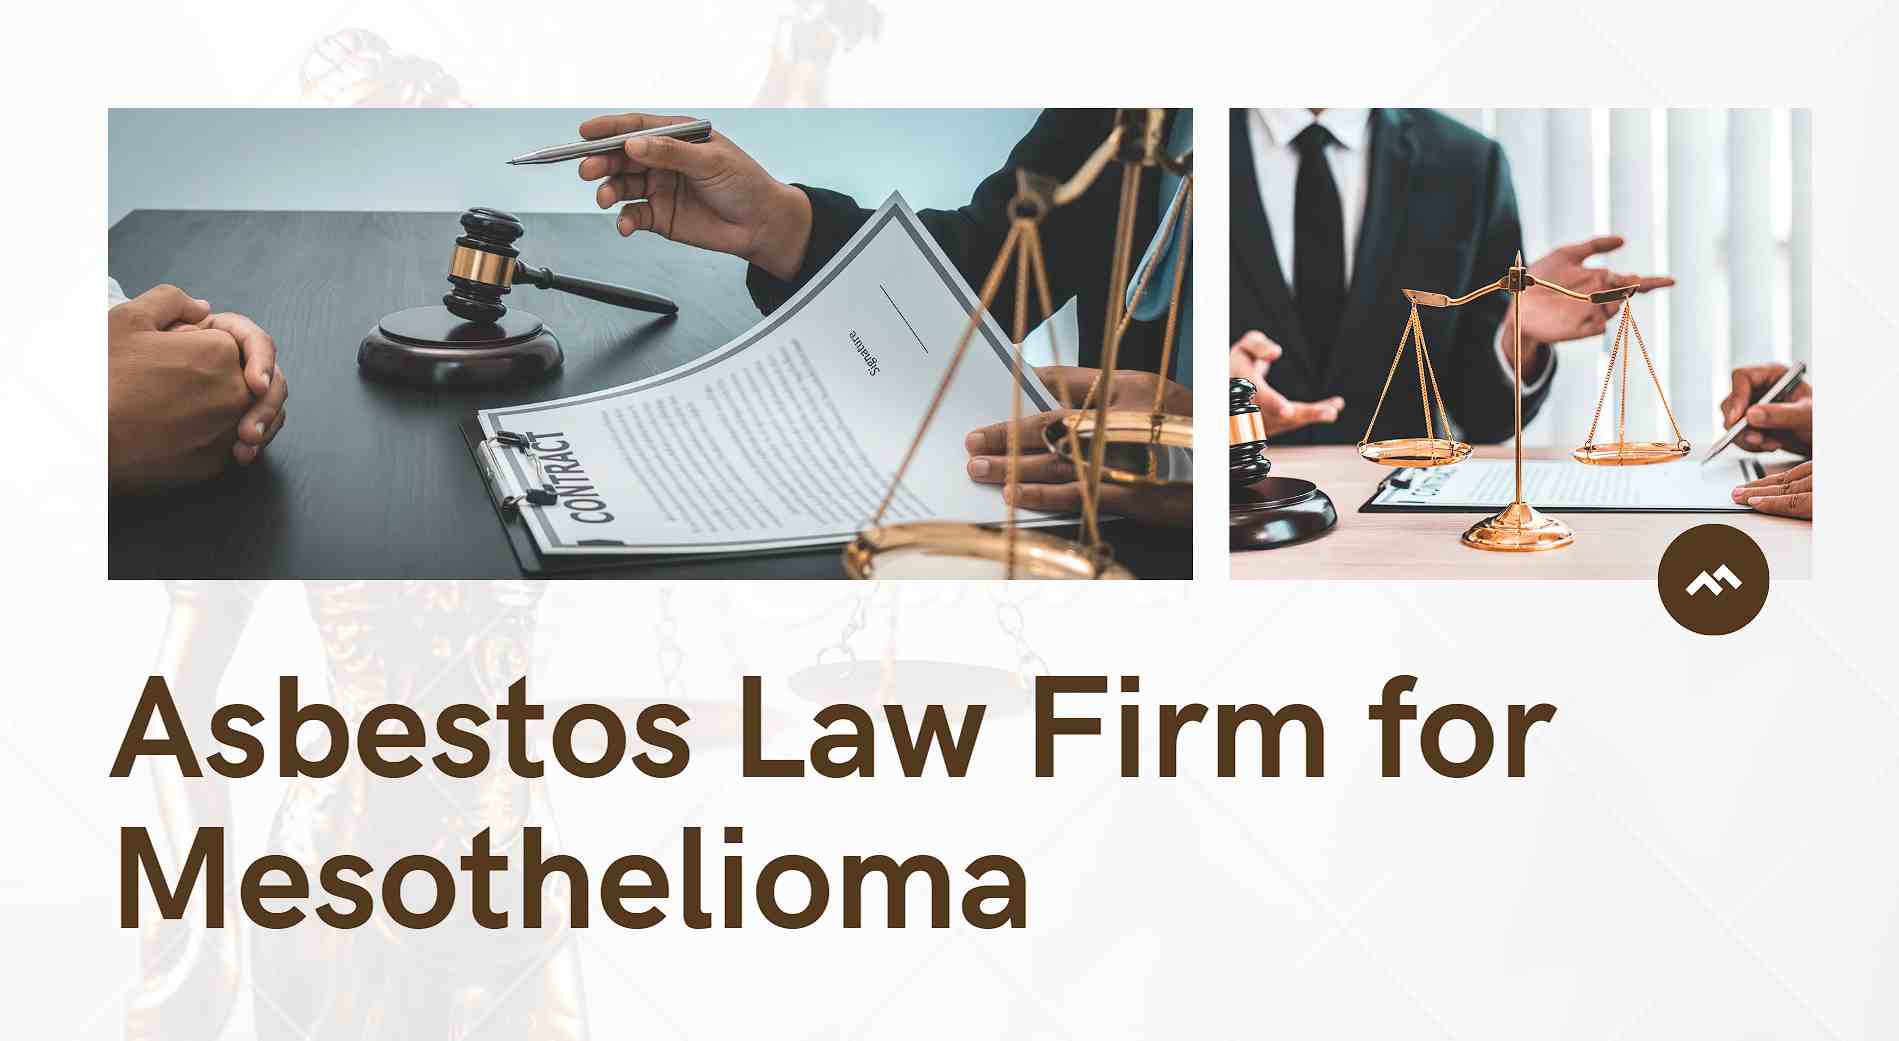 Asbestos Law Firm for Mesothelioma